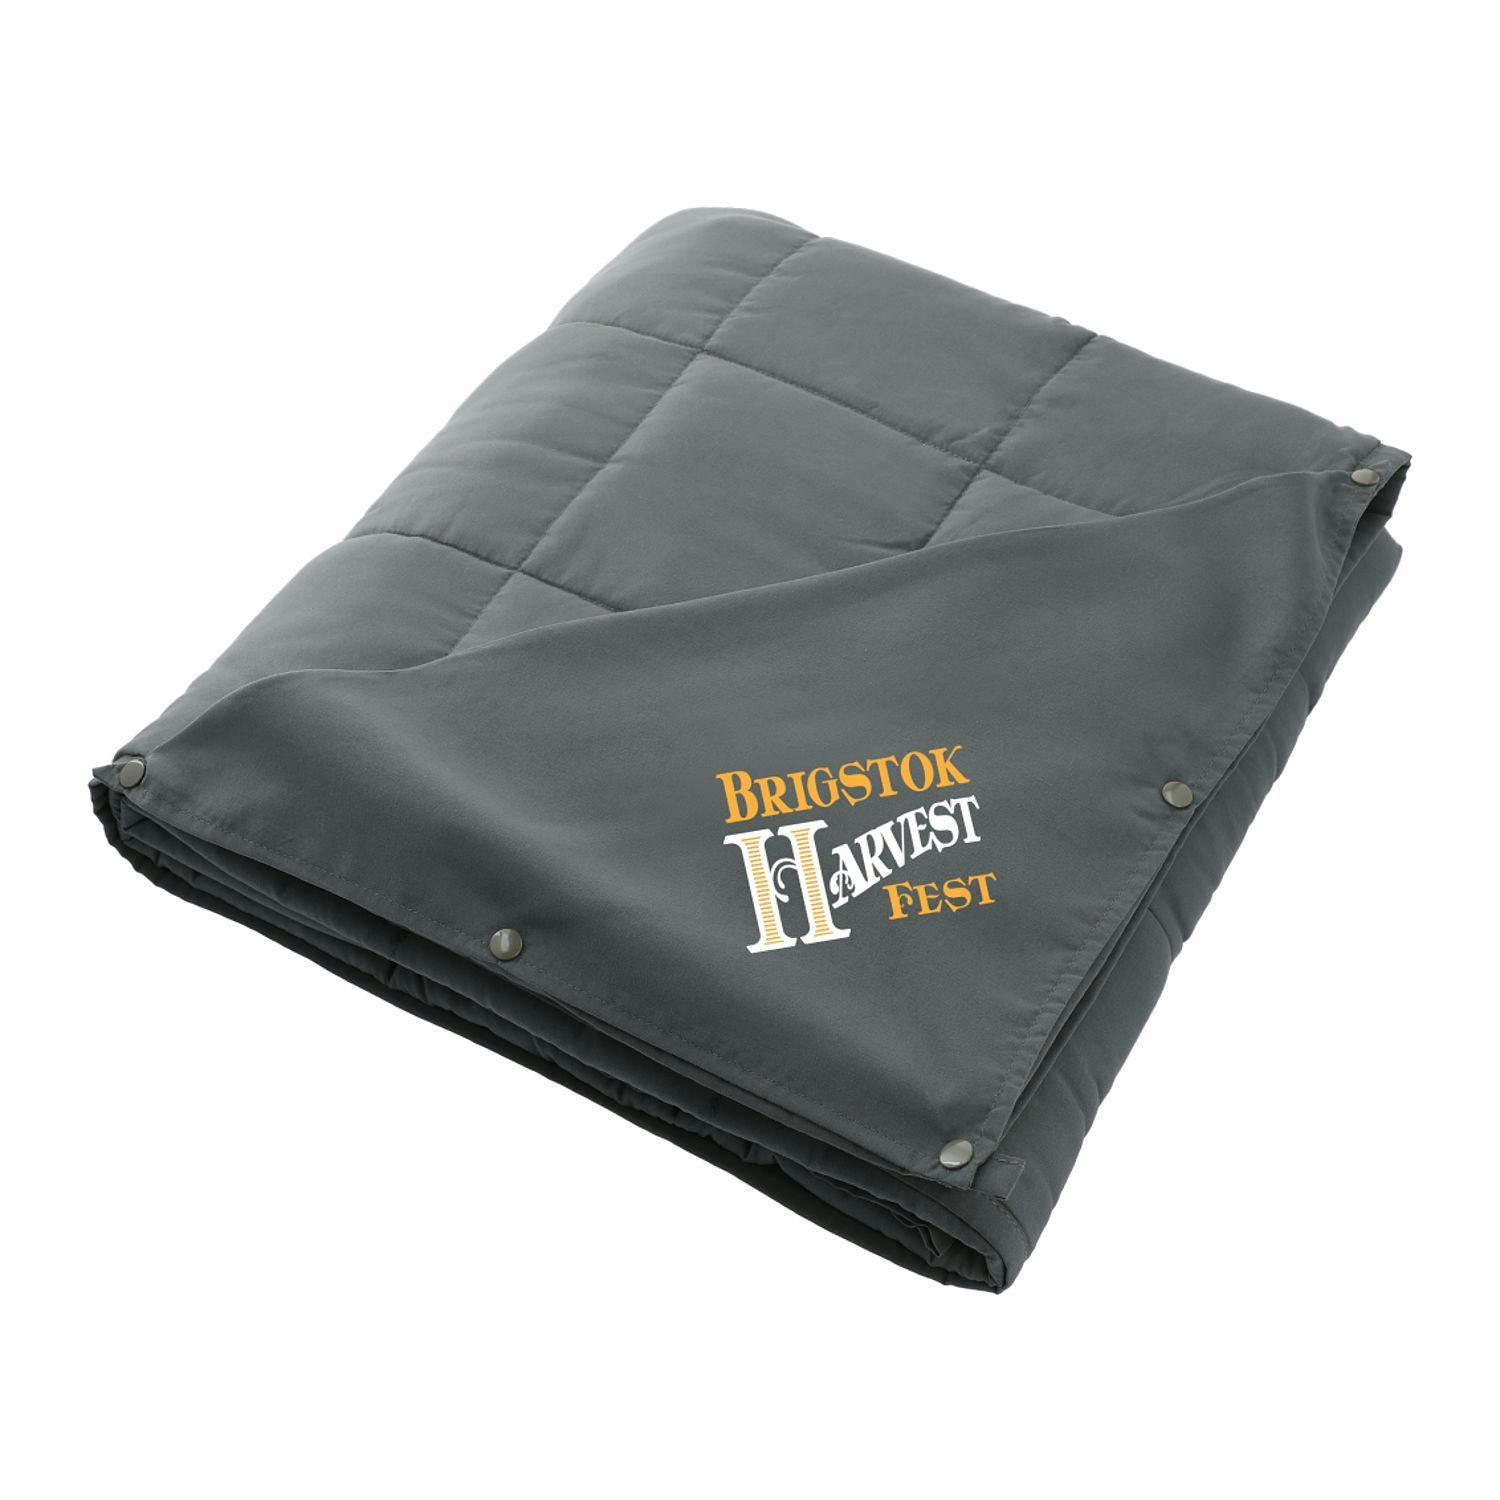 Zen 12lb Weighted Blanket - additional Image 3